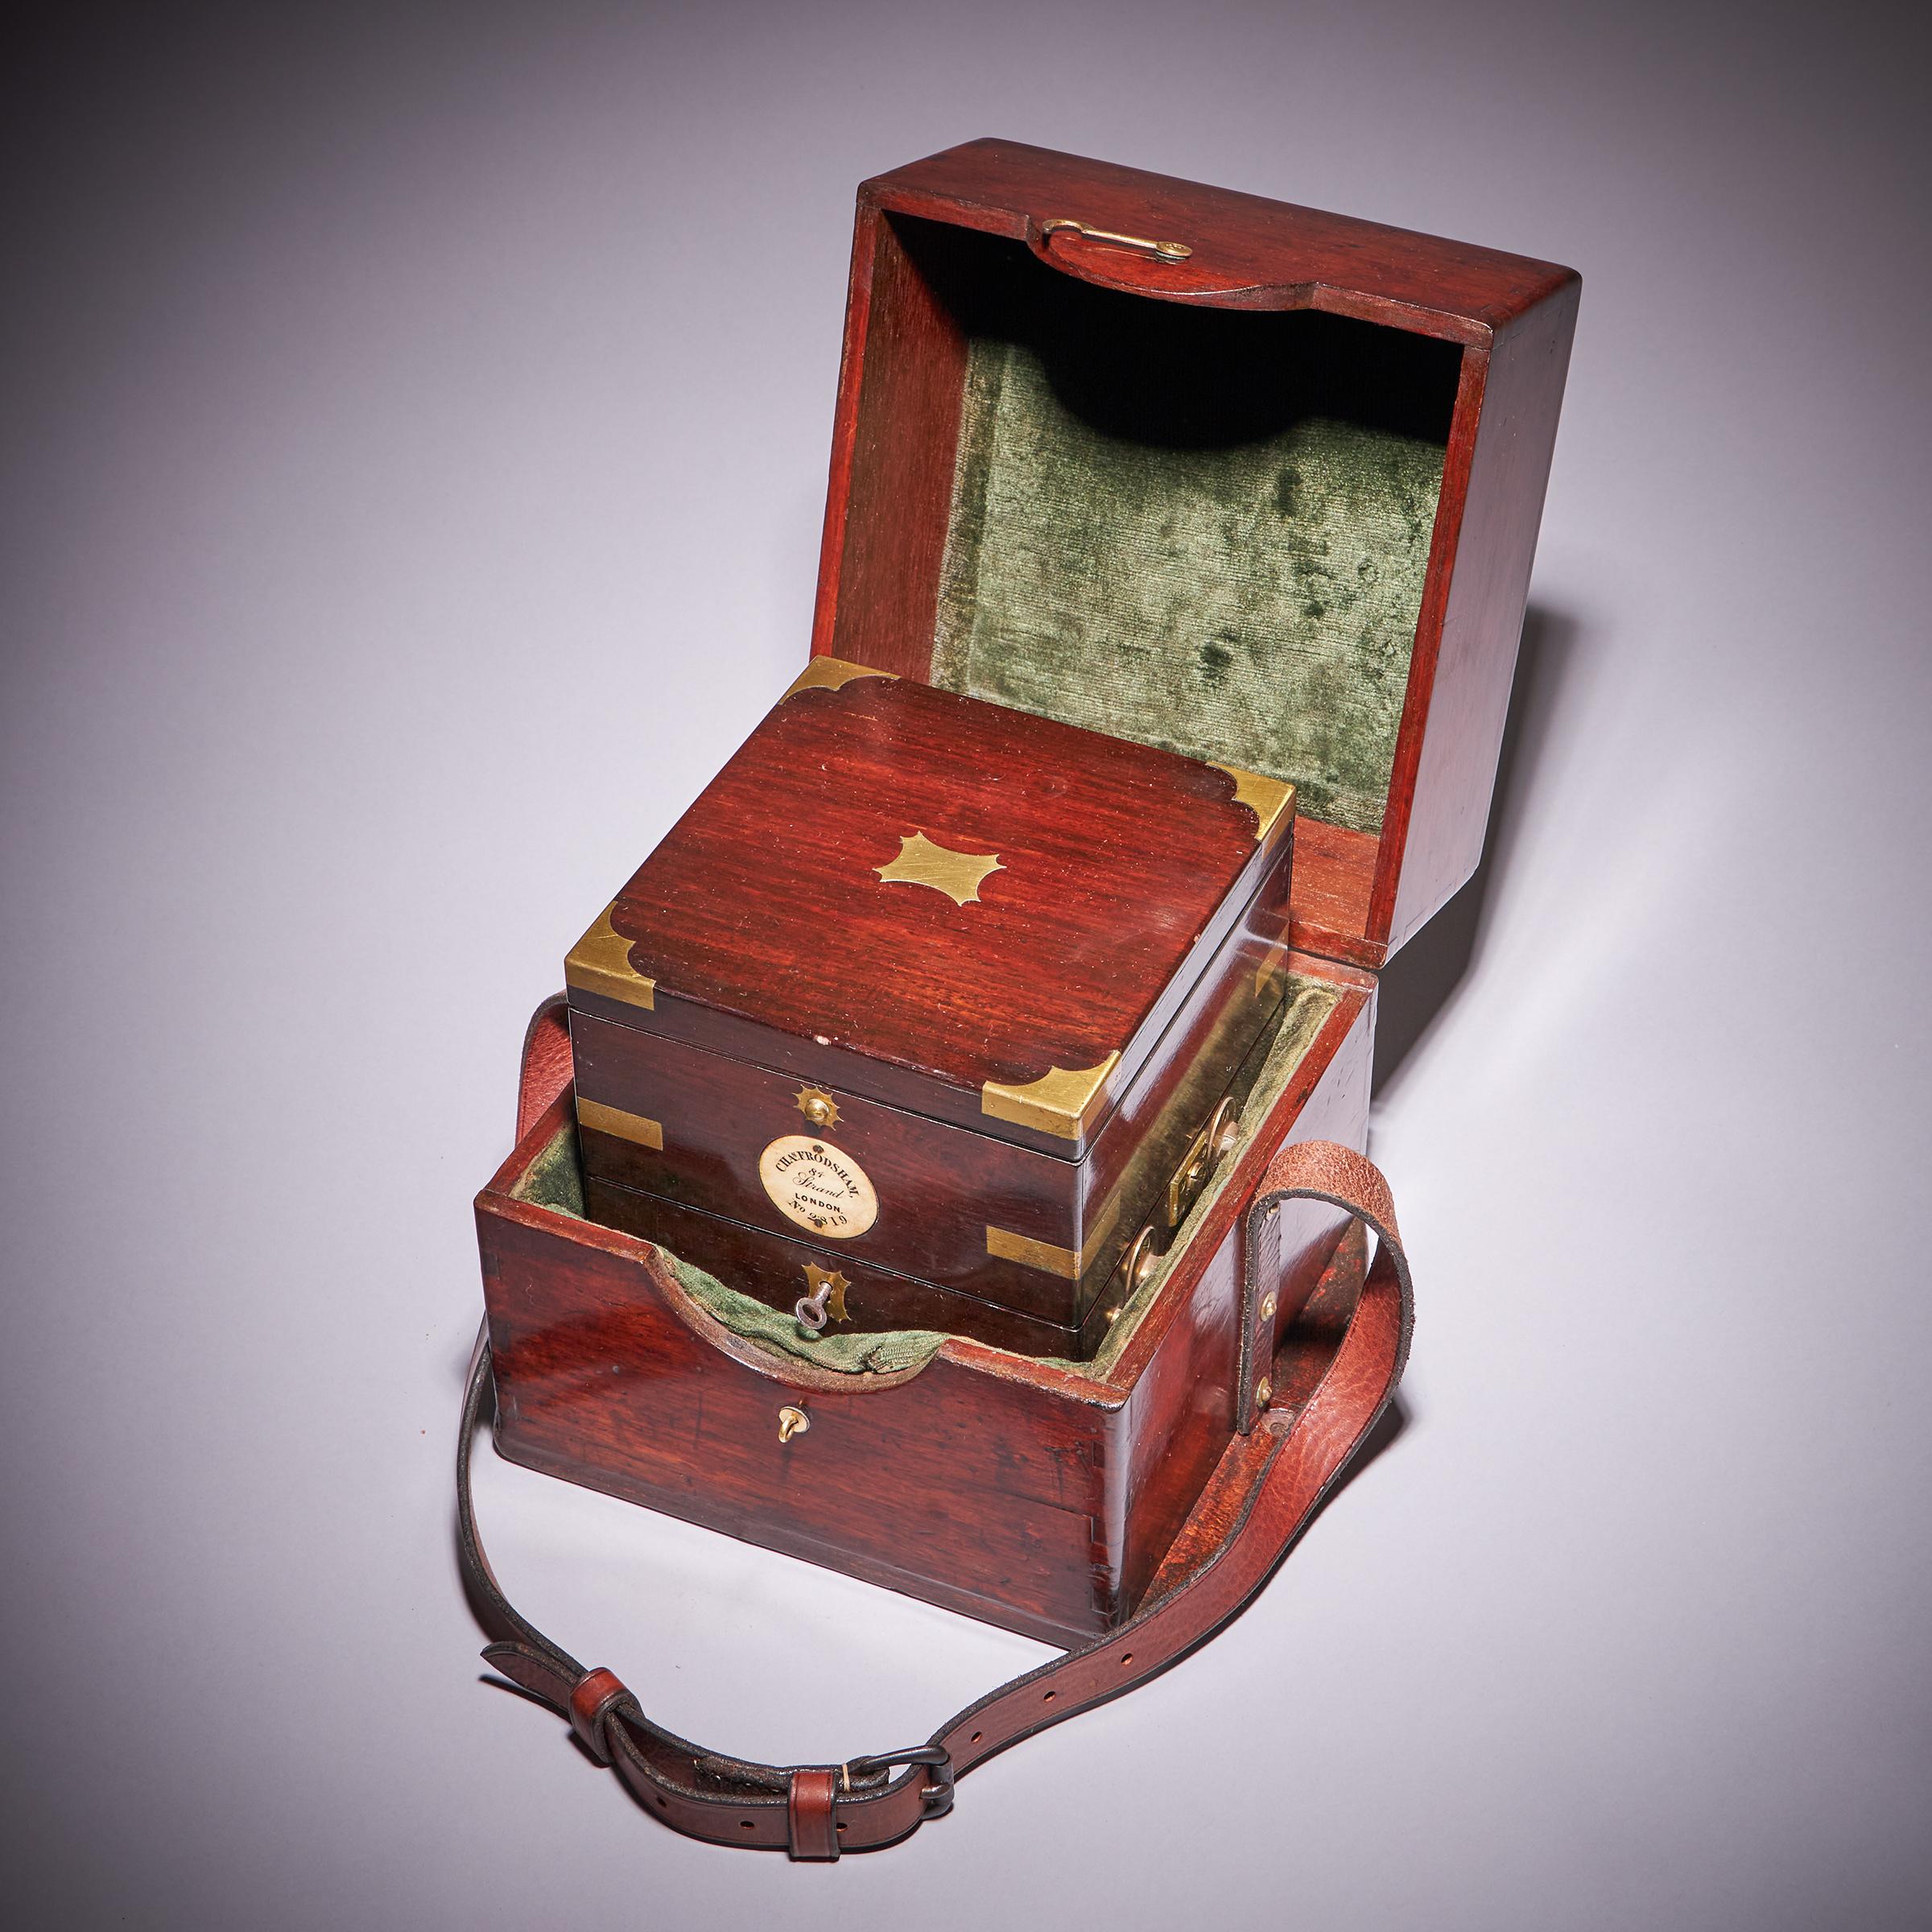 A Sturdy English Two-Day Marine Chronometer  Made by the Renowned Maker Charles Frodsham, c. 1860

A classic expertly produced 19th century English chronometer in a three-tier rosewood case, made c. 1860. The typically brass bound case consists of a